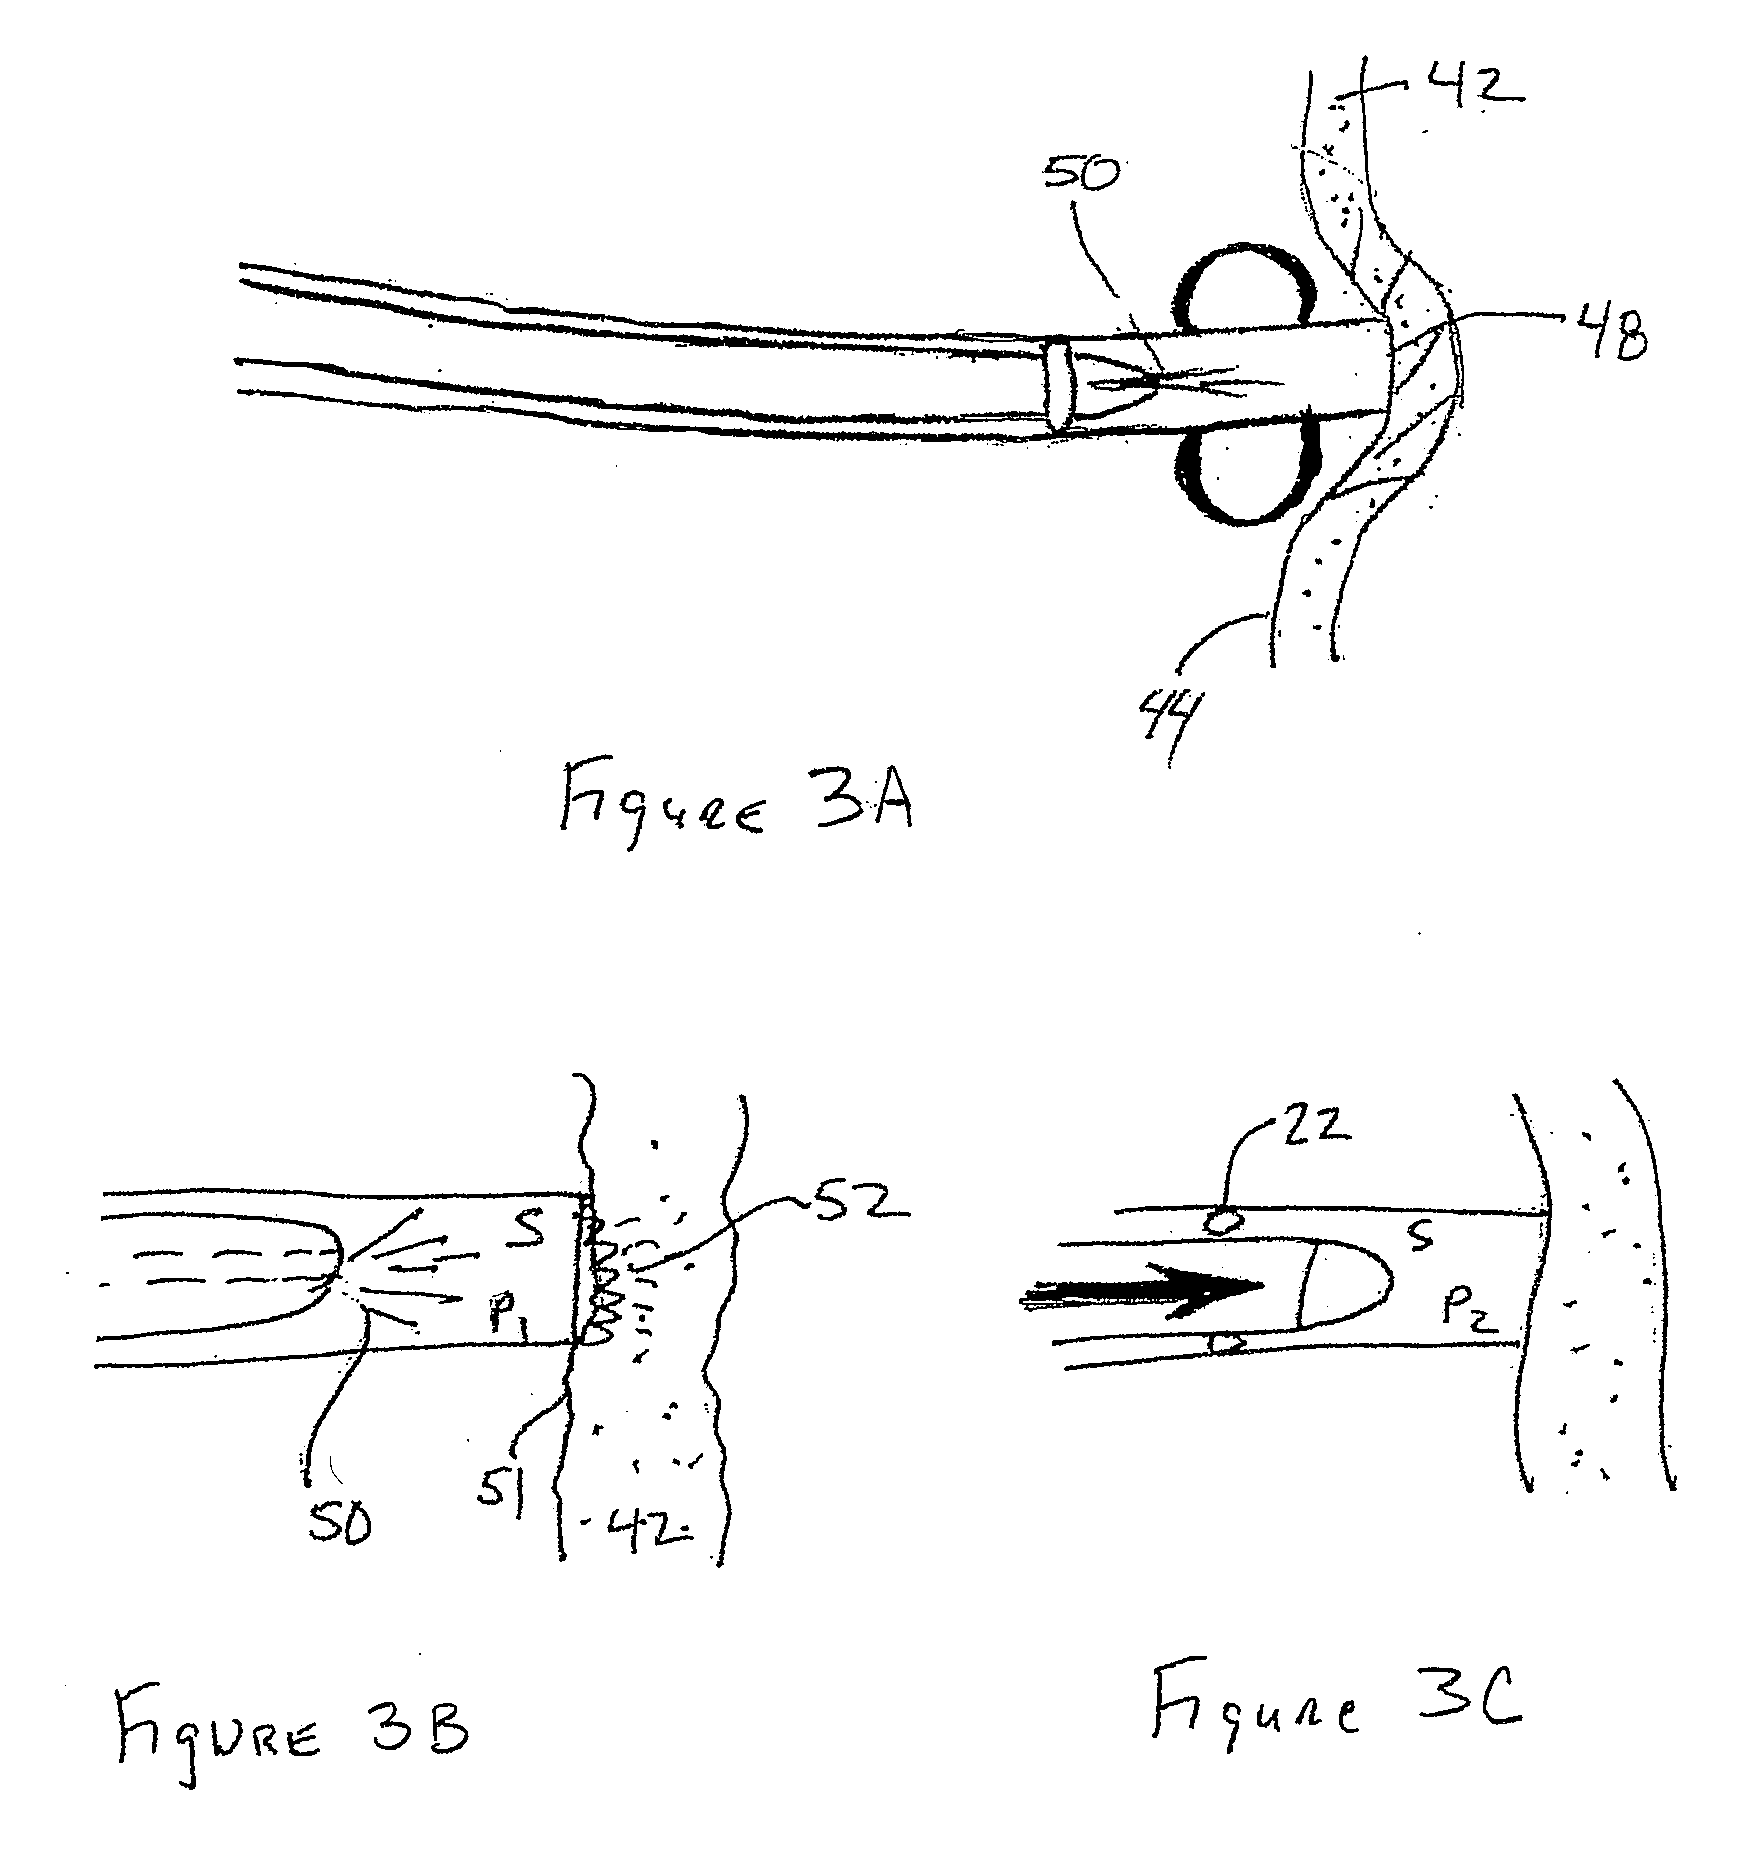 Trans Urinary Bladder Access Device and Method